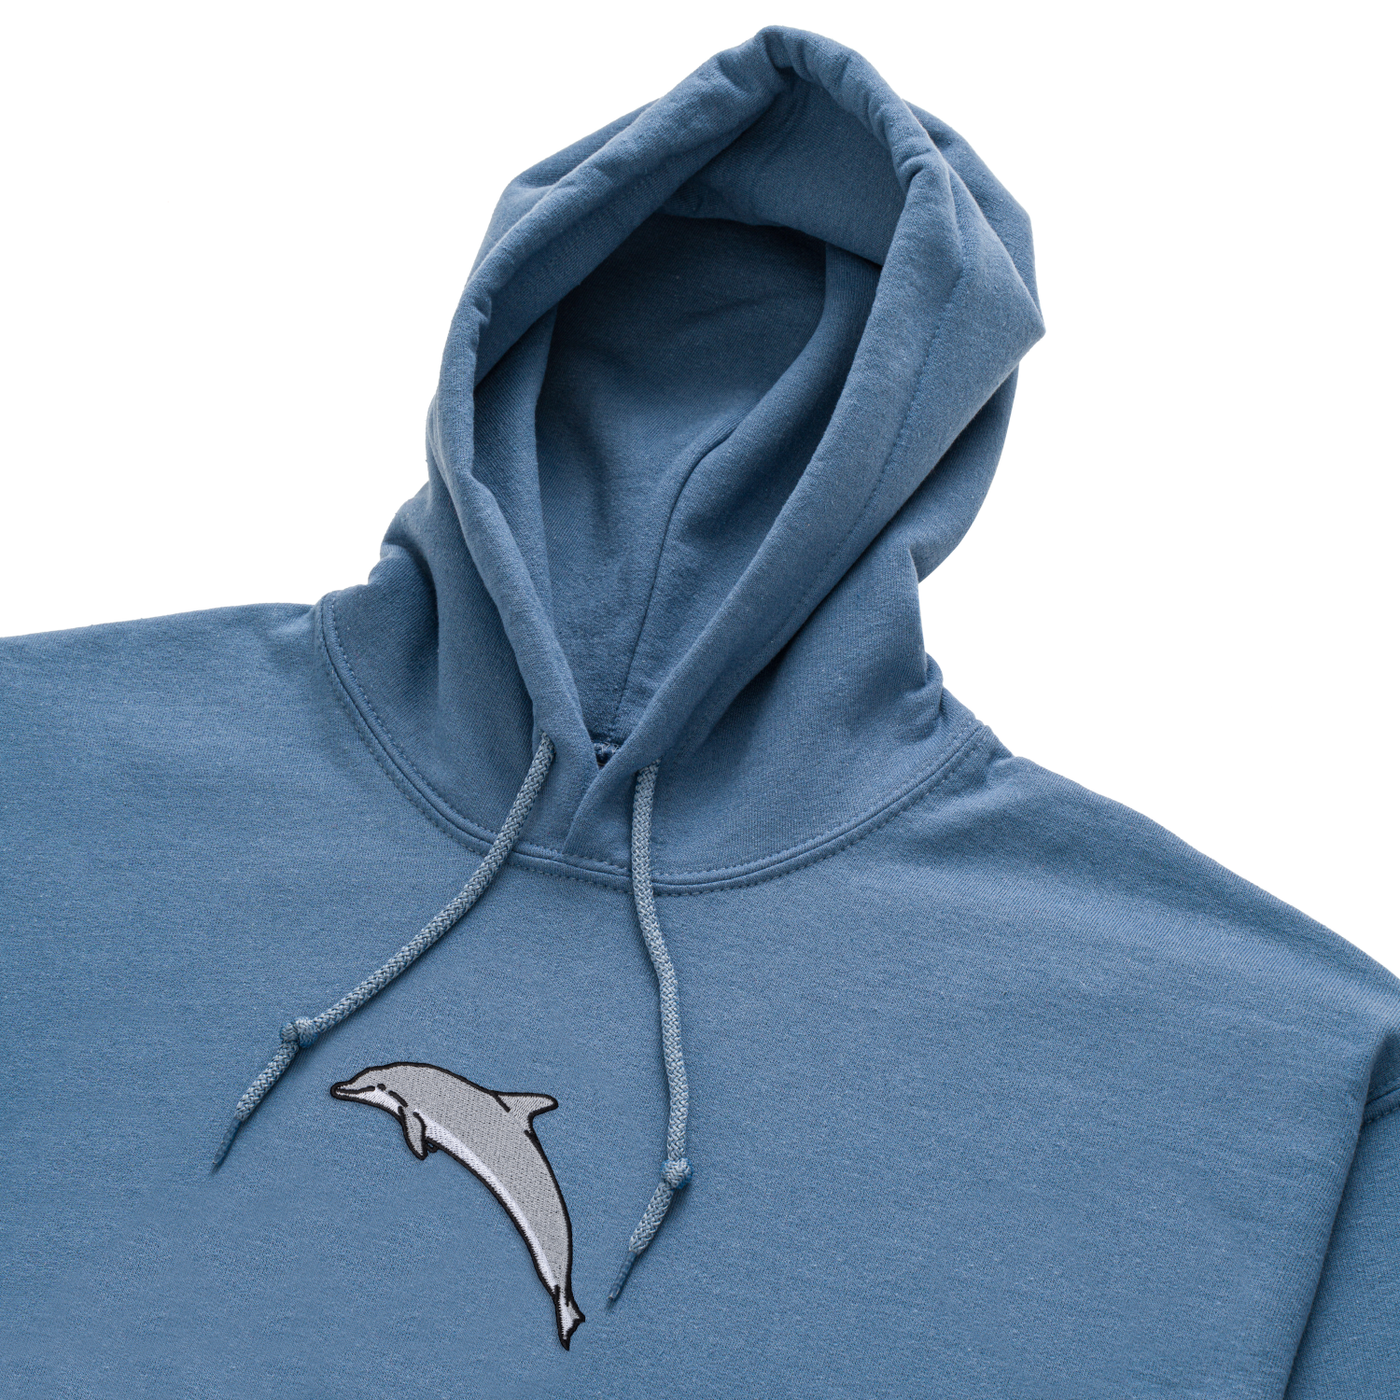 Bobby's Planet Men's Embroidered Dolphin Hoodie from Seven Seas Fish Animals Collection in Indigo Blue Color#color_indigo-blue